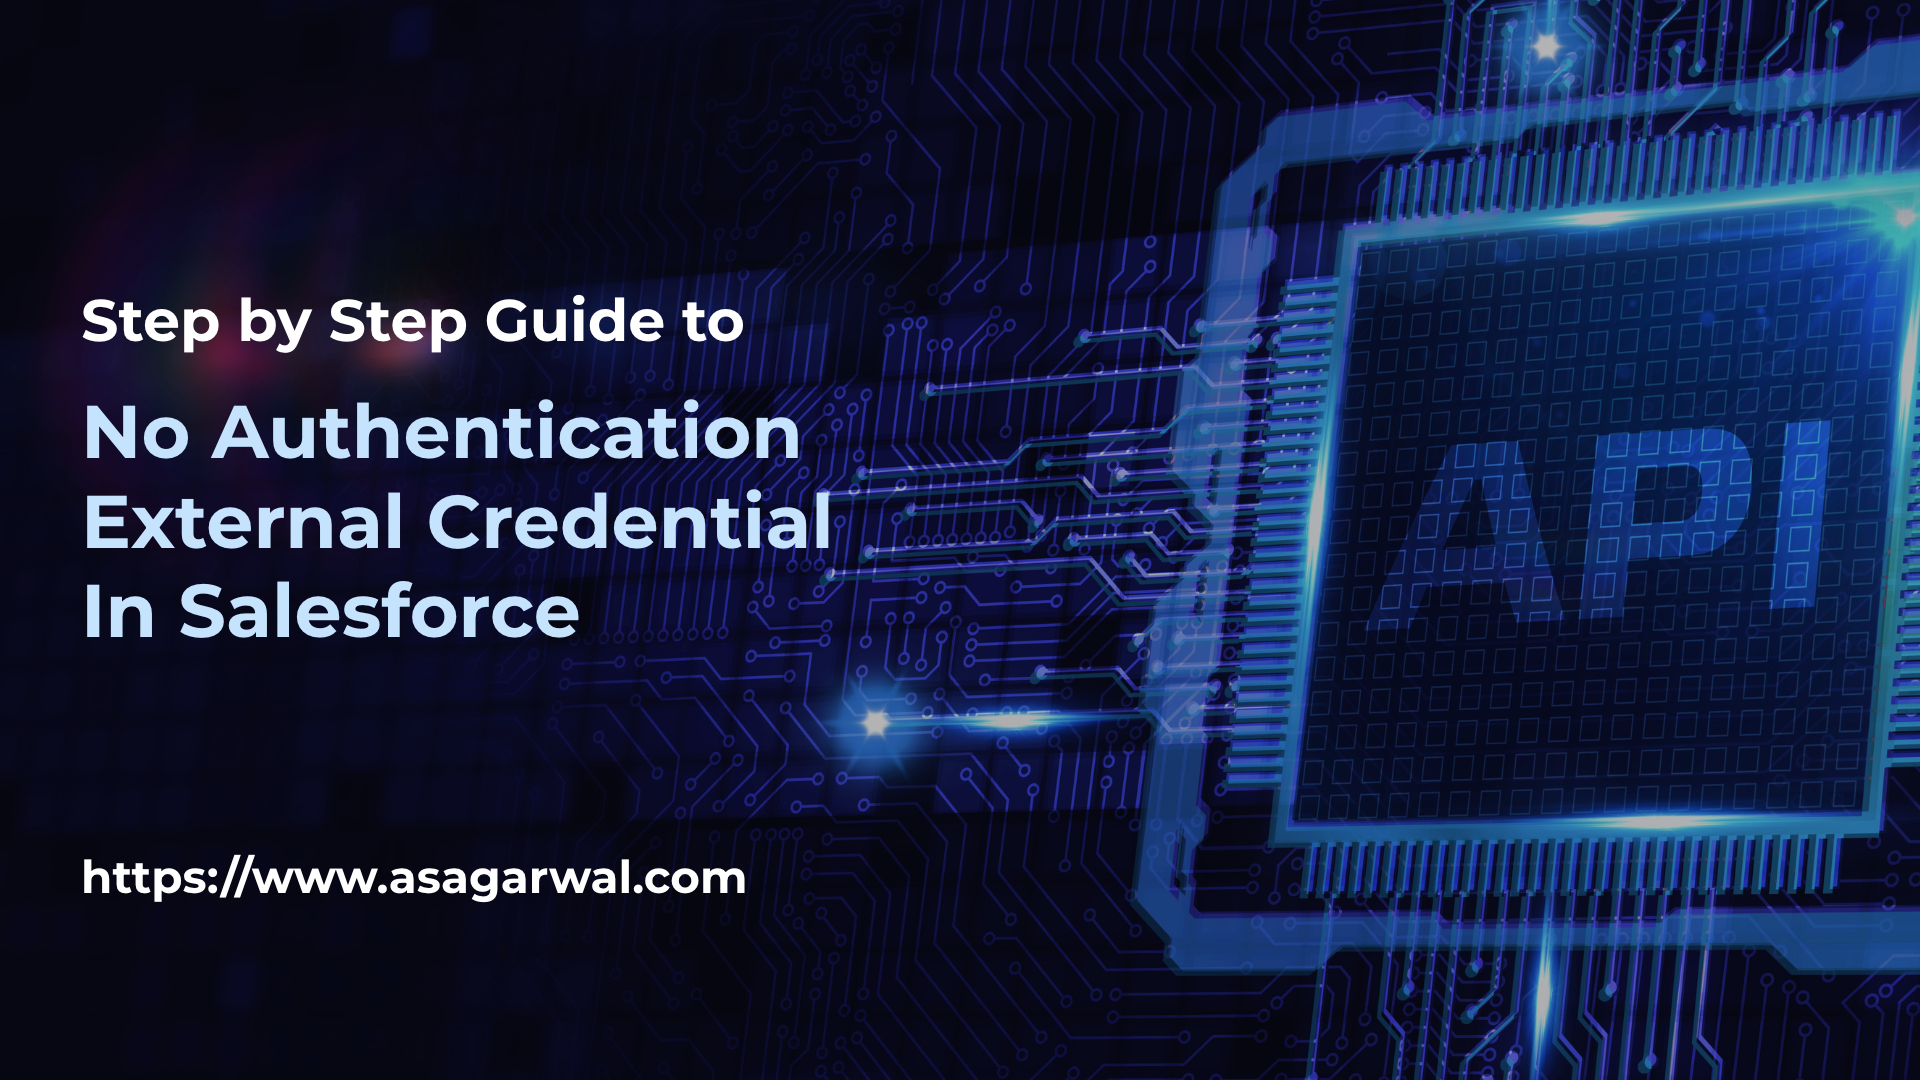 Step by Step Guide to No Authentication External Credential In Salesforce